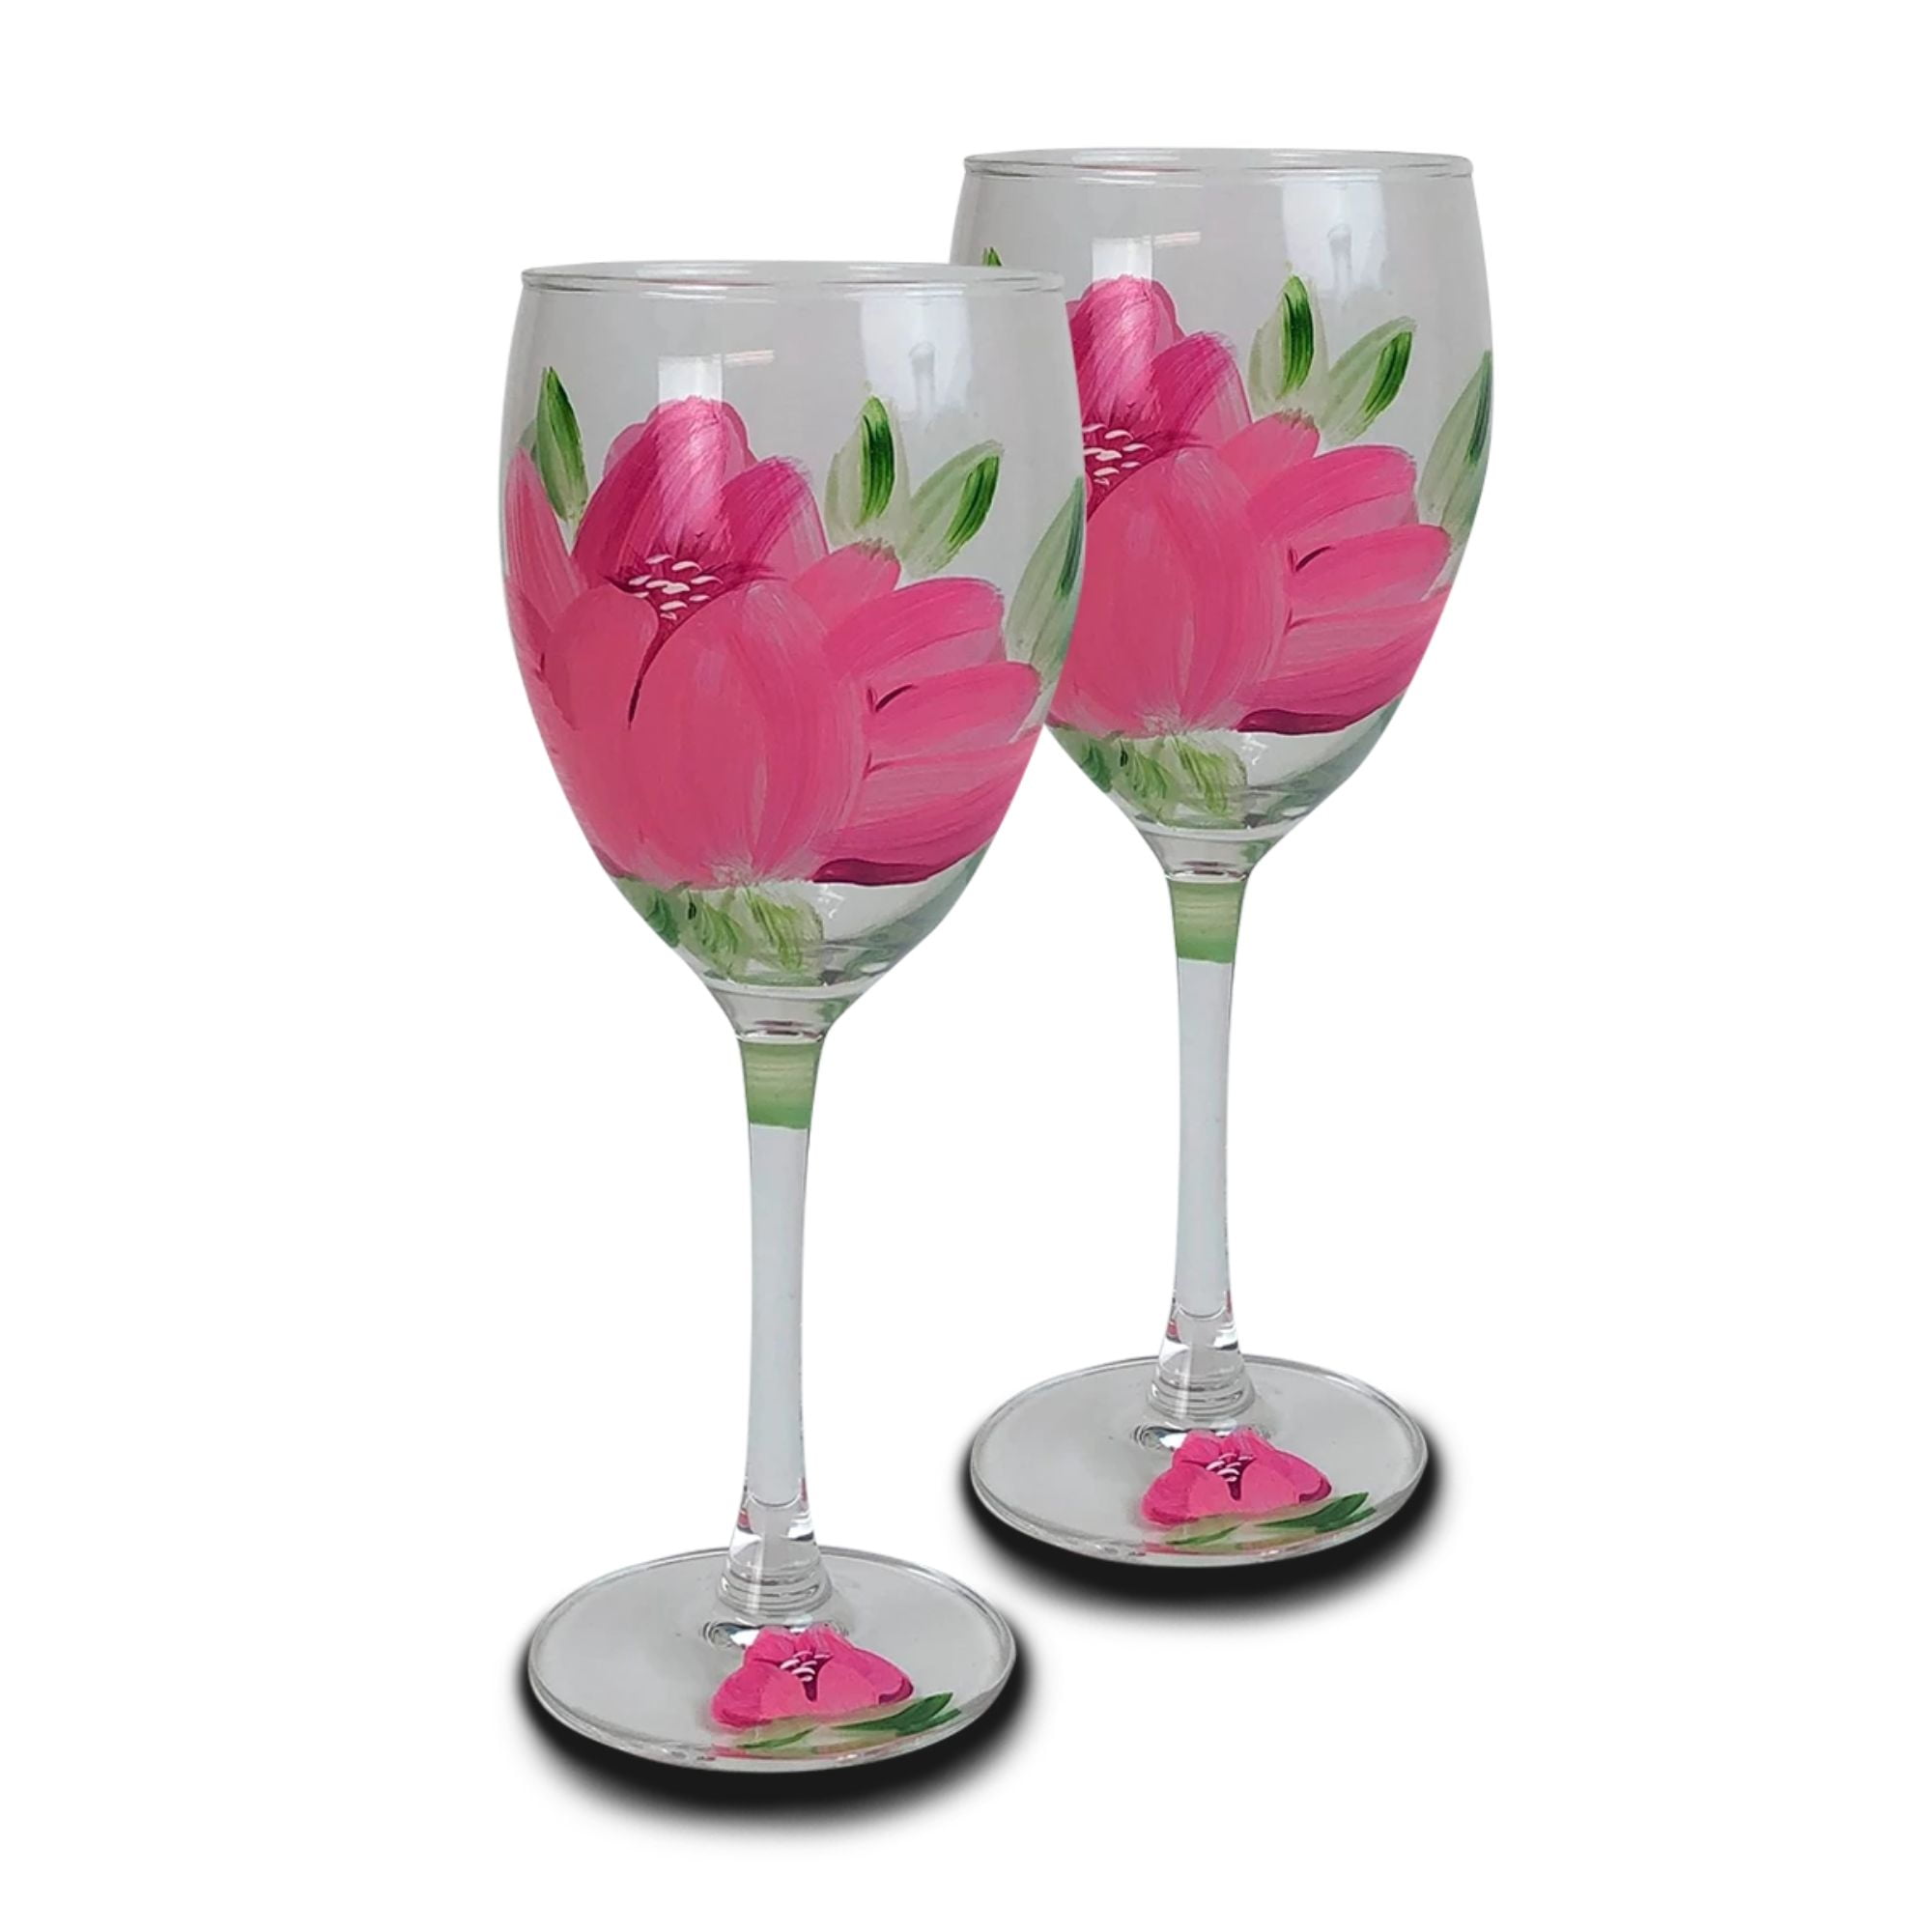 New Hand Painted Wine Glass Unique Design Hand Painted Glassware